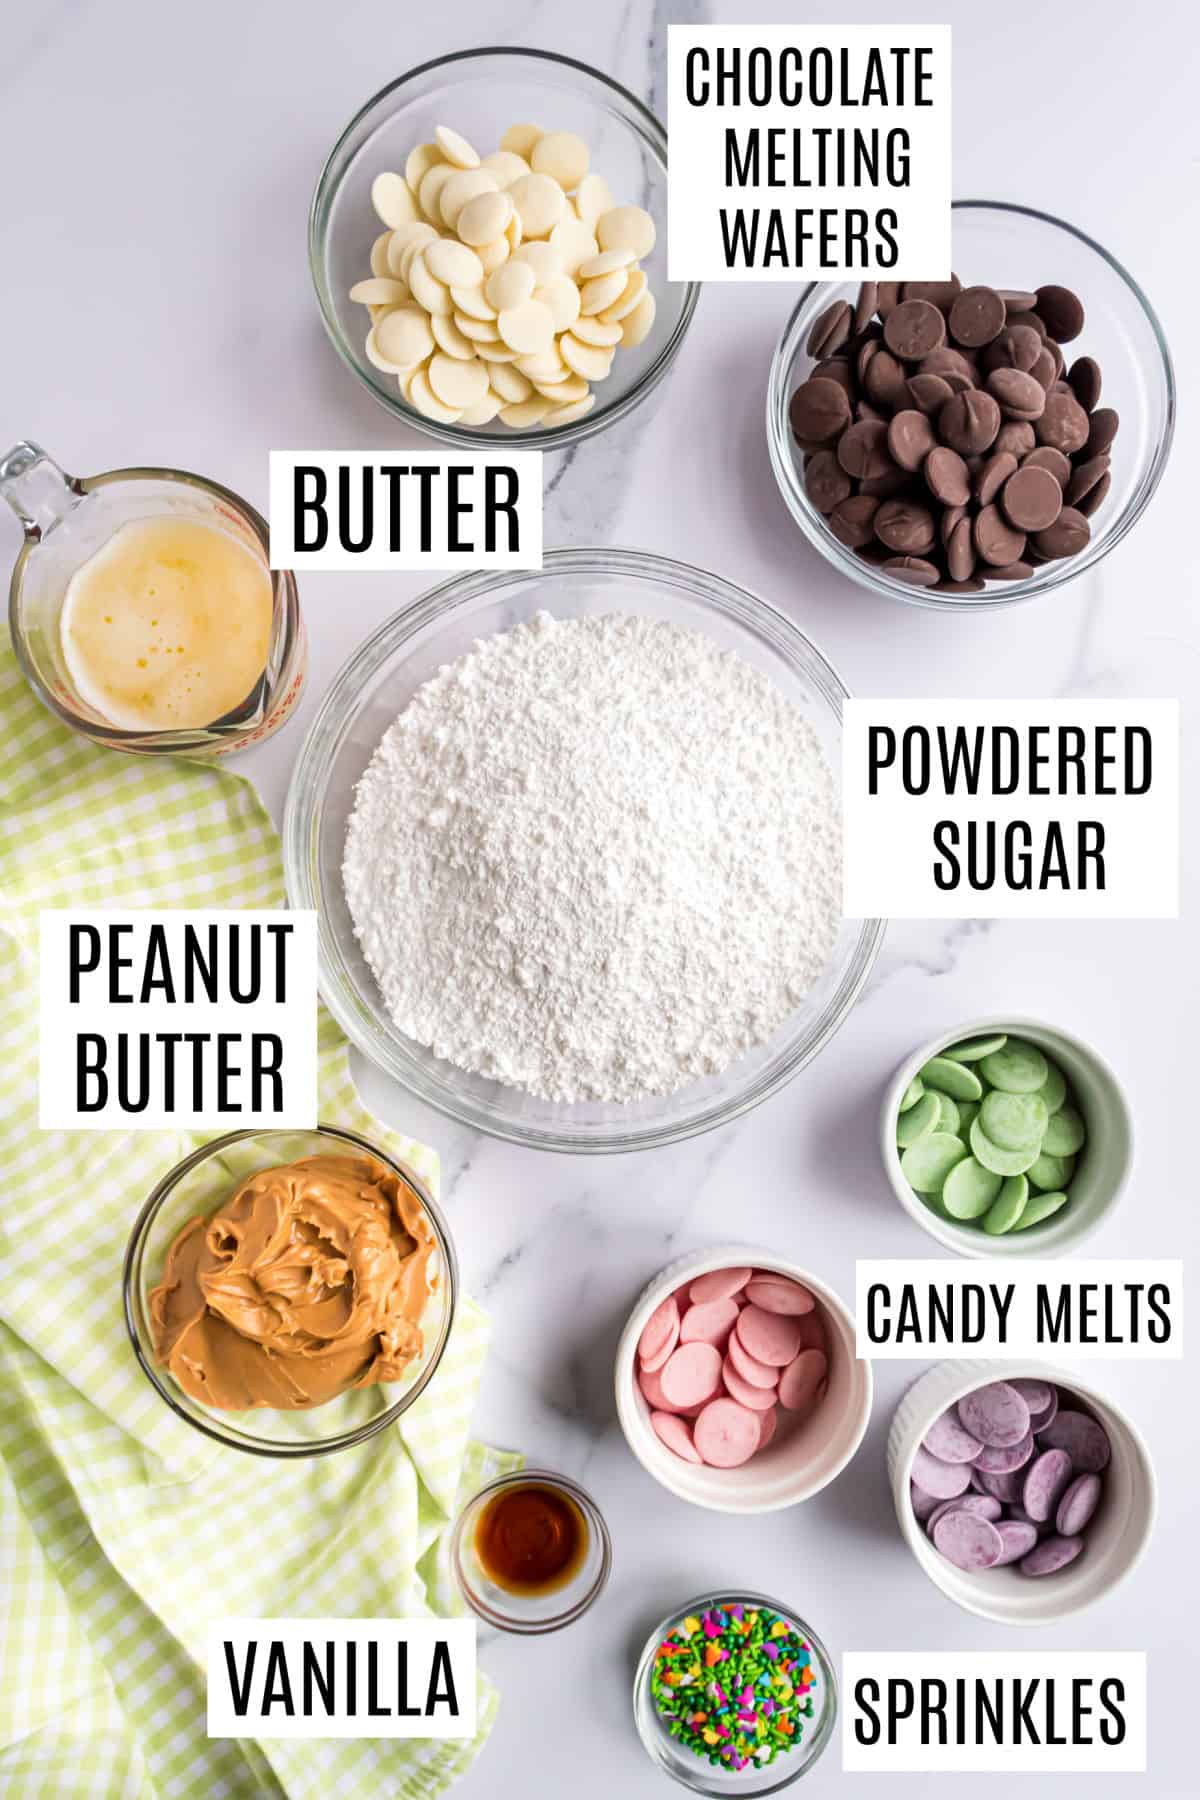 Ingredients needed to make chocolate peanut butter eggs.